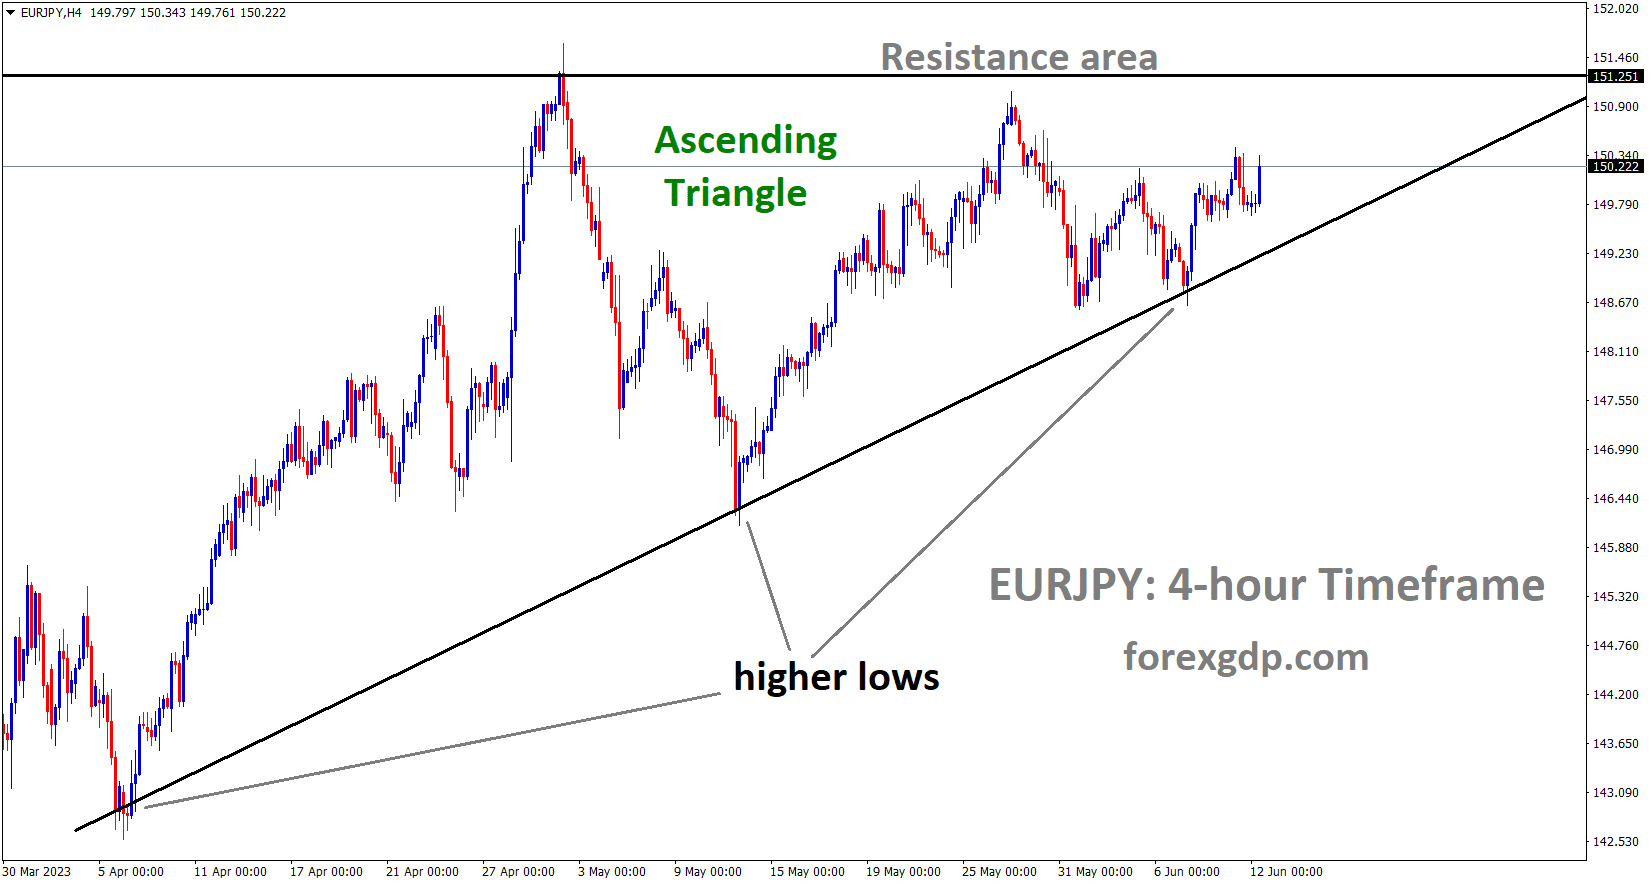 EURJPY is moving in an Ascending triangle pattern and the market has rebounded from the higher low area of the pattern